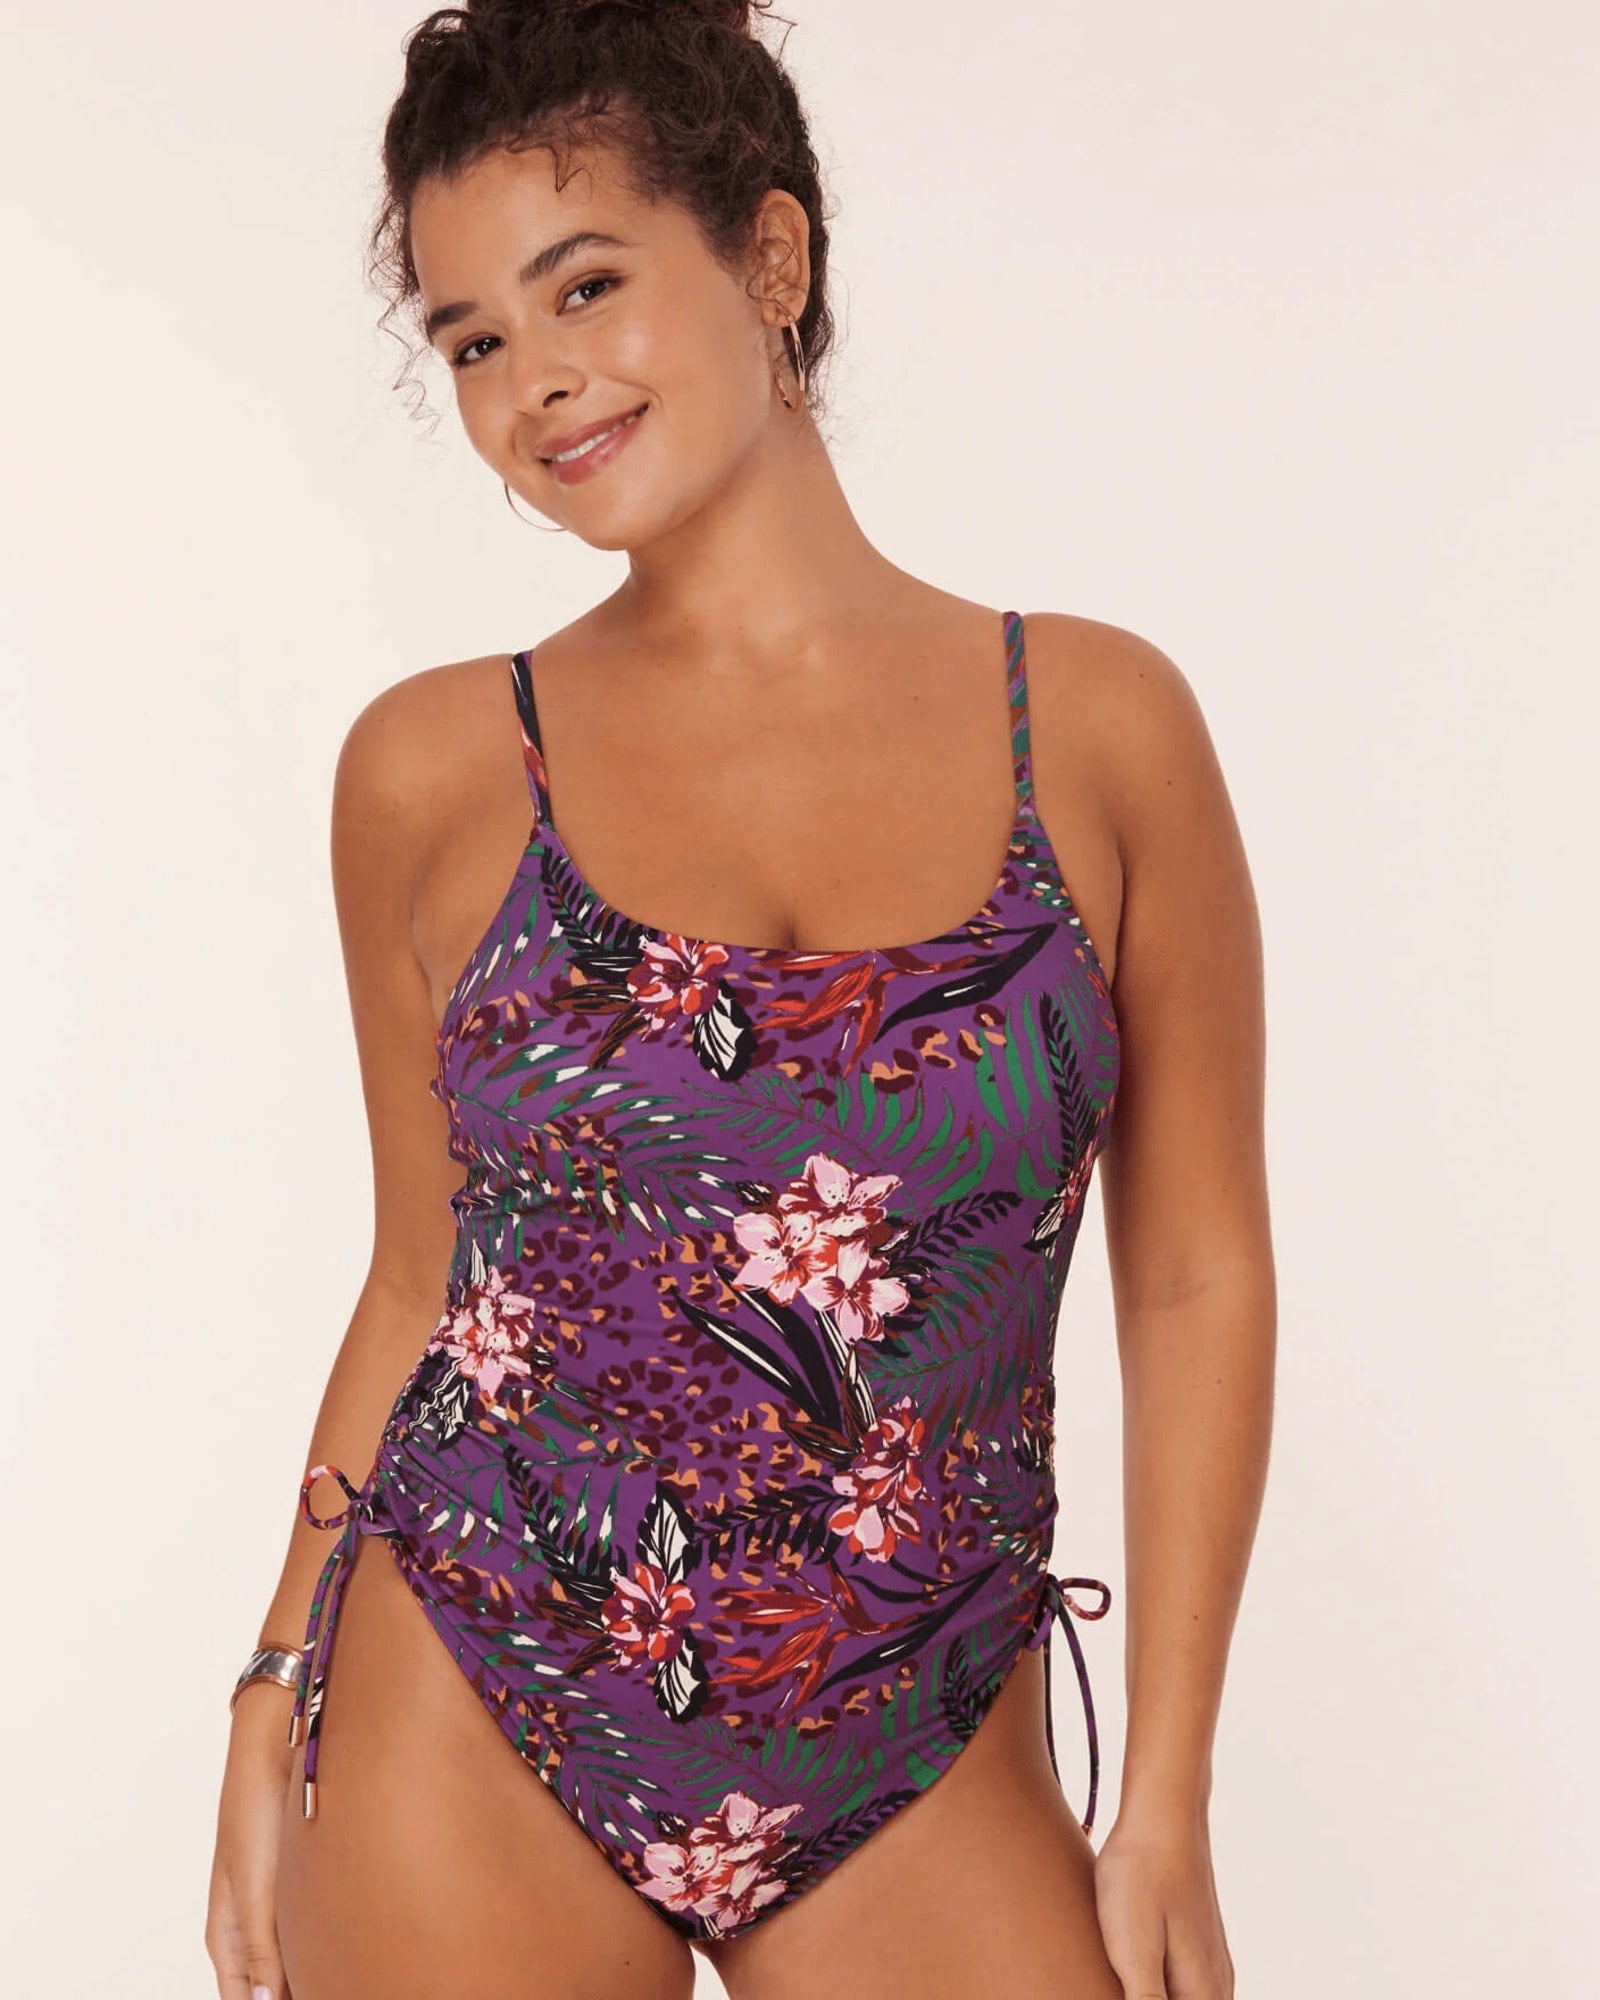 Full Swimsuit with Inserts in Floral Fantasy